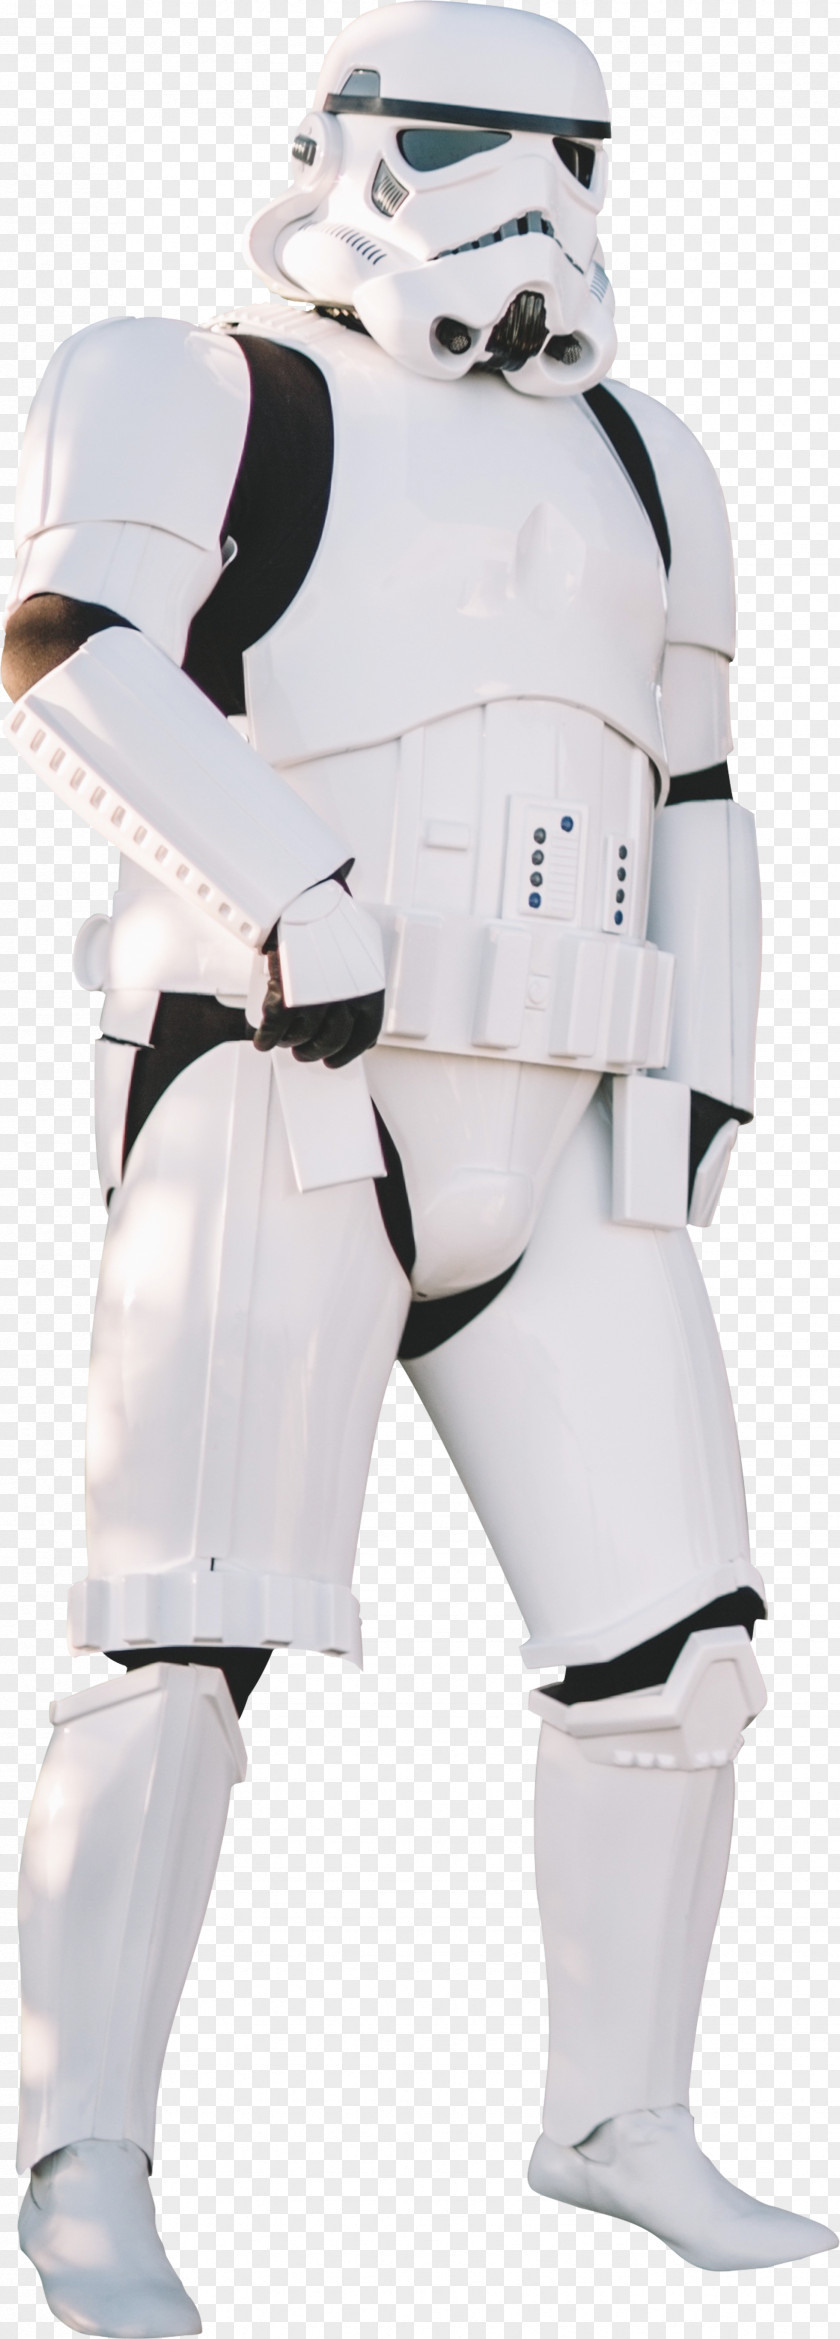 Science Fiction Star Wars Universe Armor Warrior Body Armour PNG